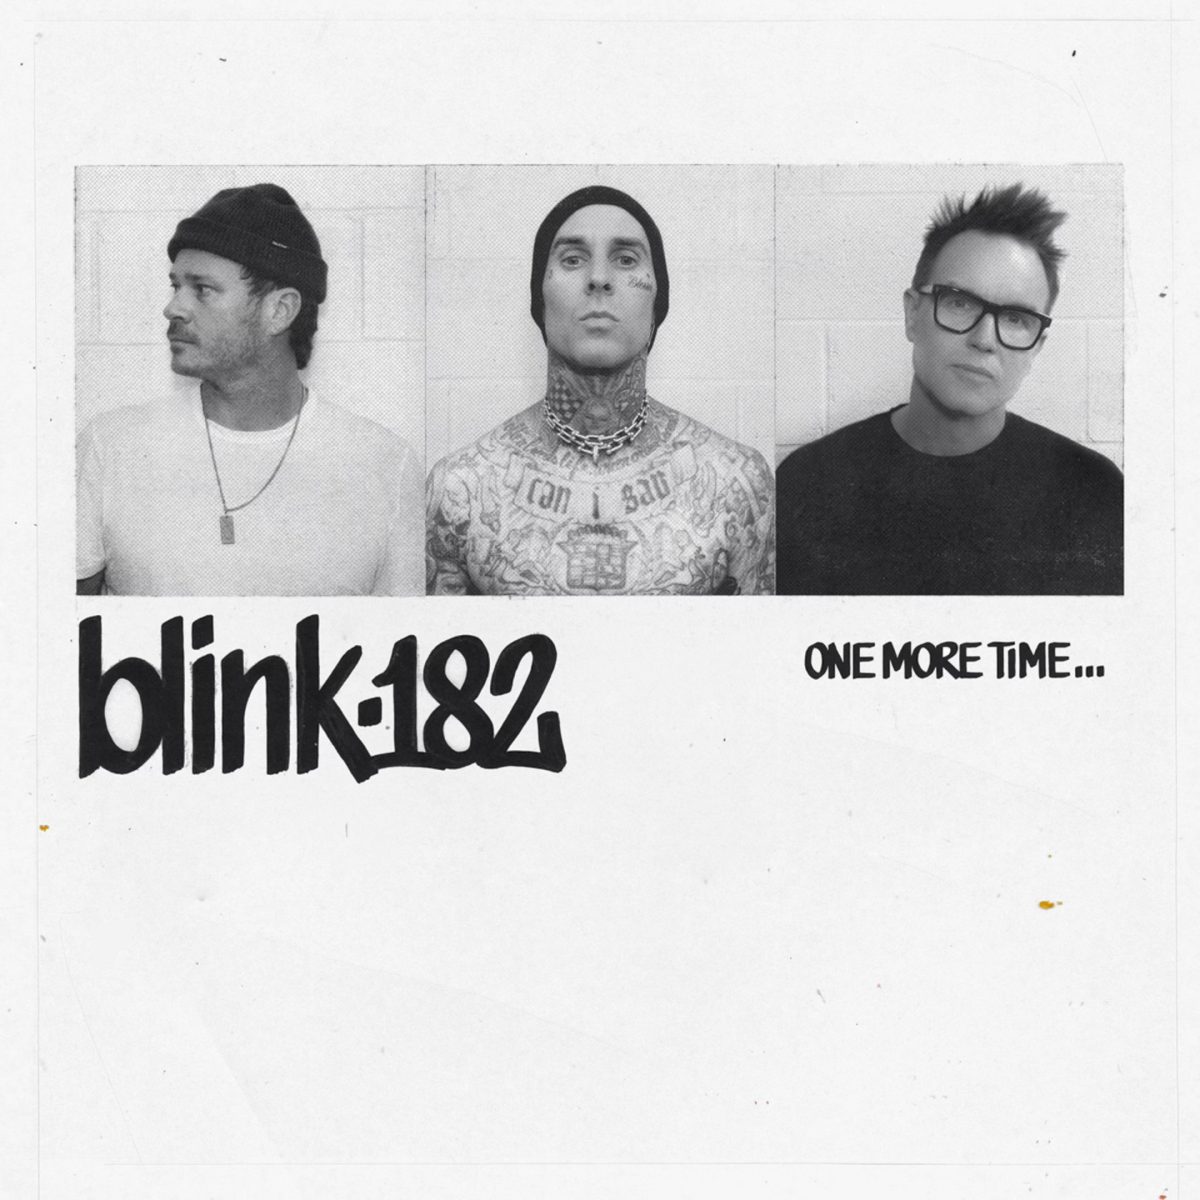 Listening to blink-182’s new album more than One More Time...